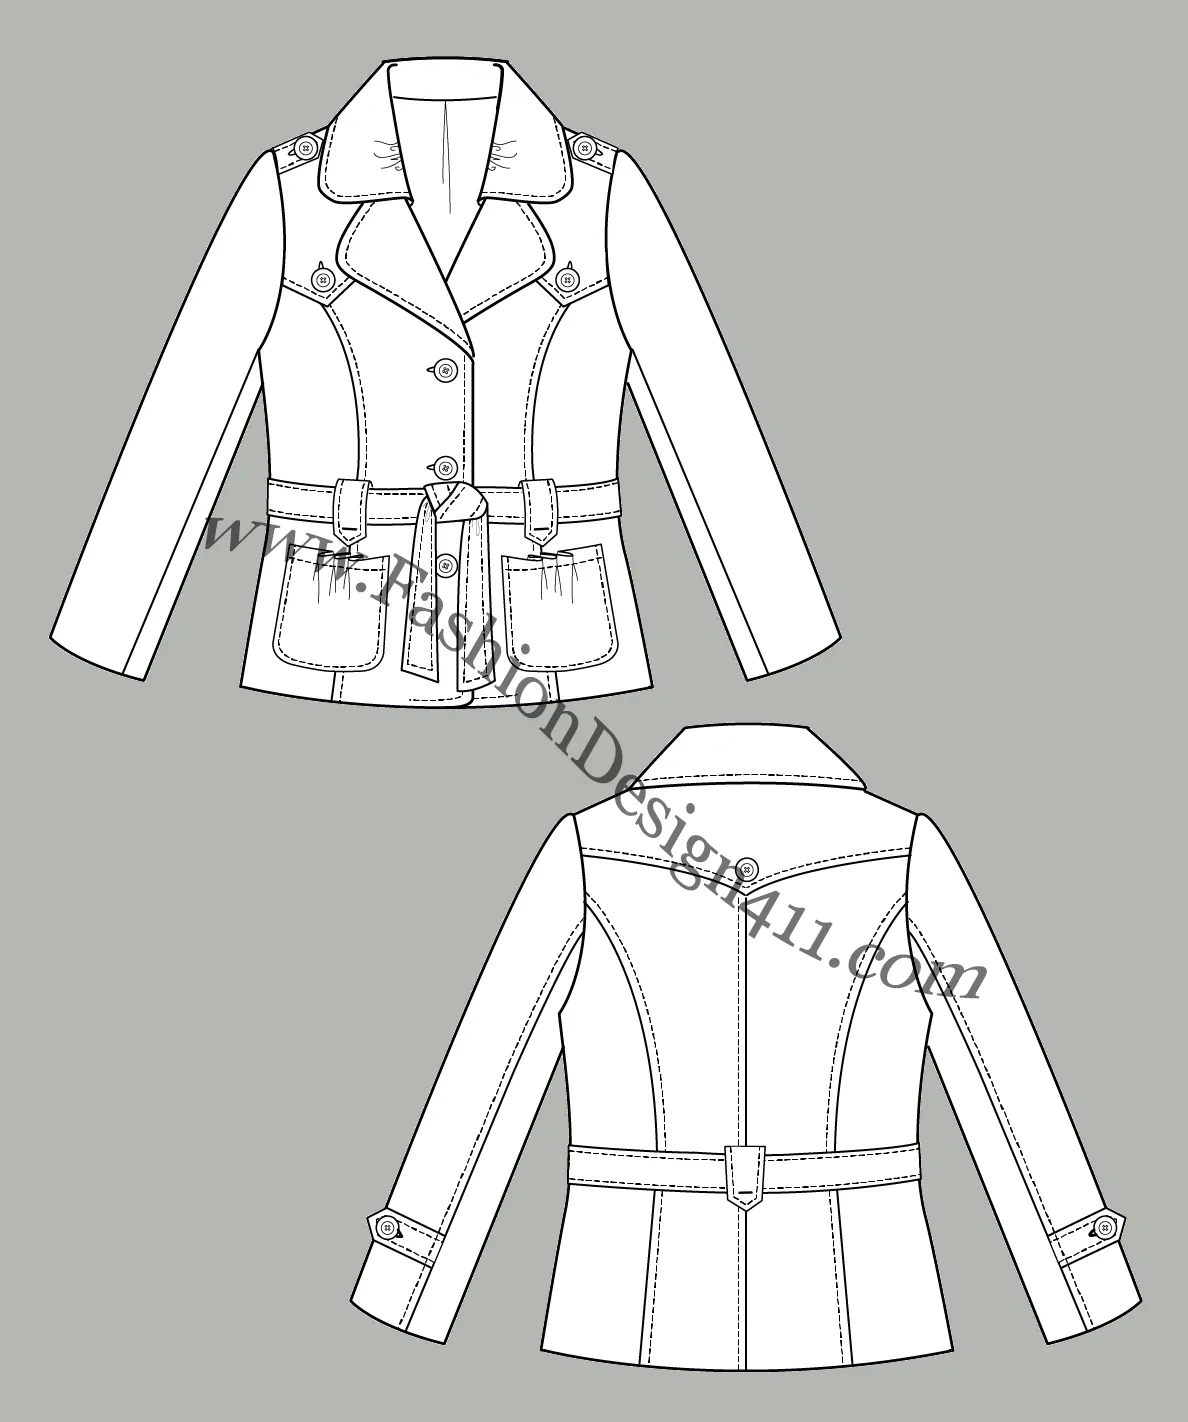 029 fashion flat sketch of a women's, western style yoke, belted blazer with shoulder tabs and tied in a knot sash belt